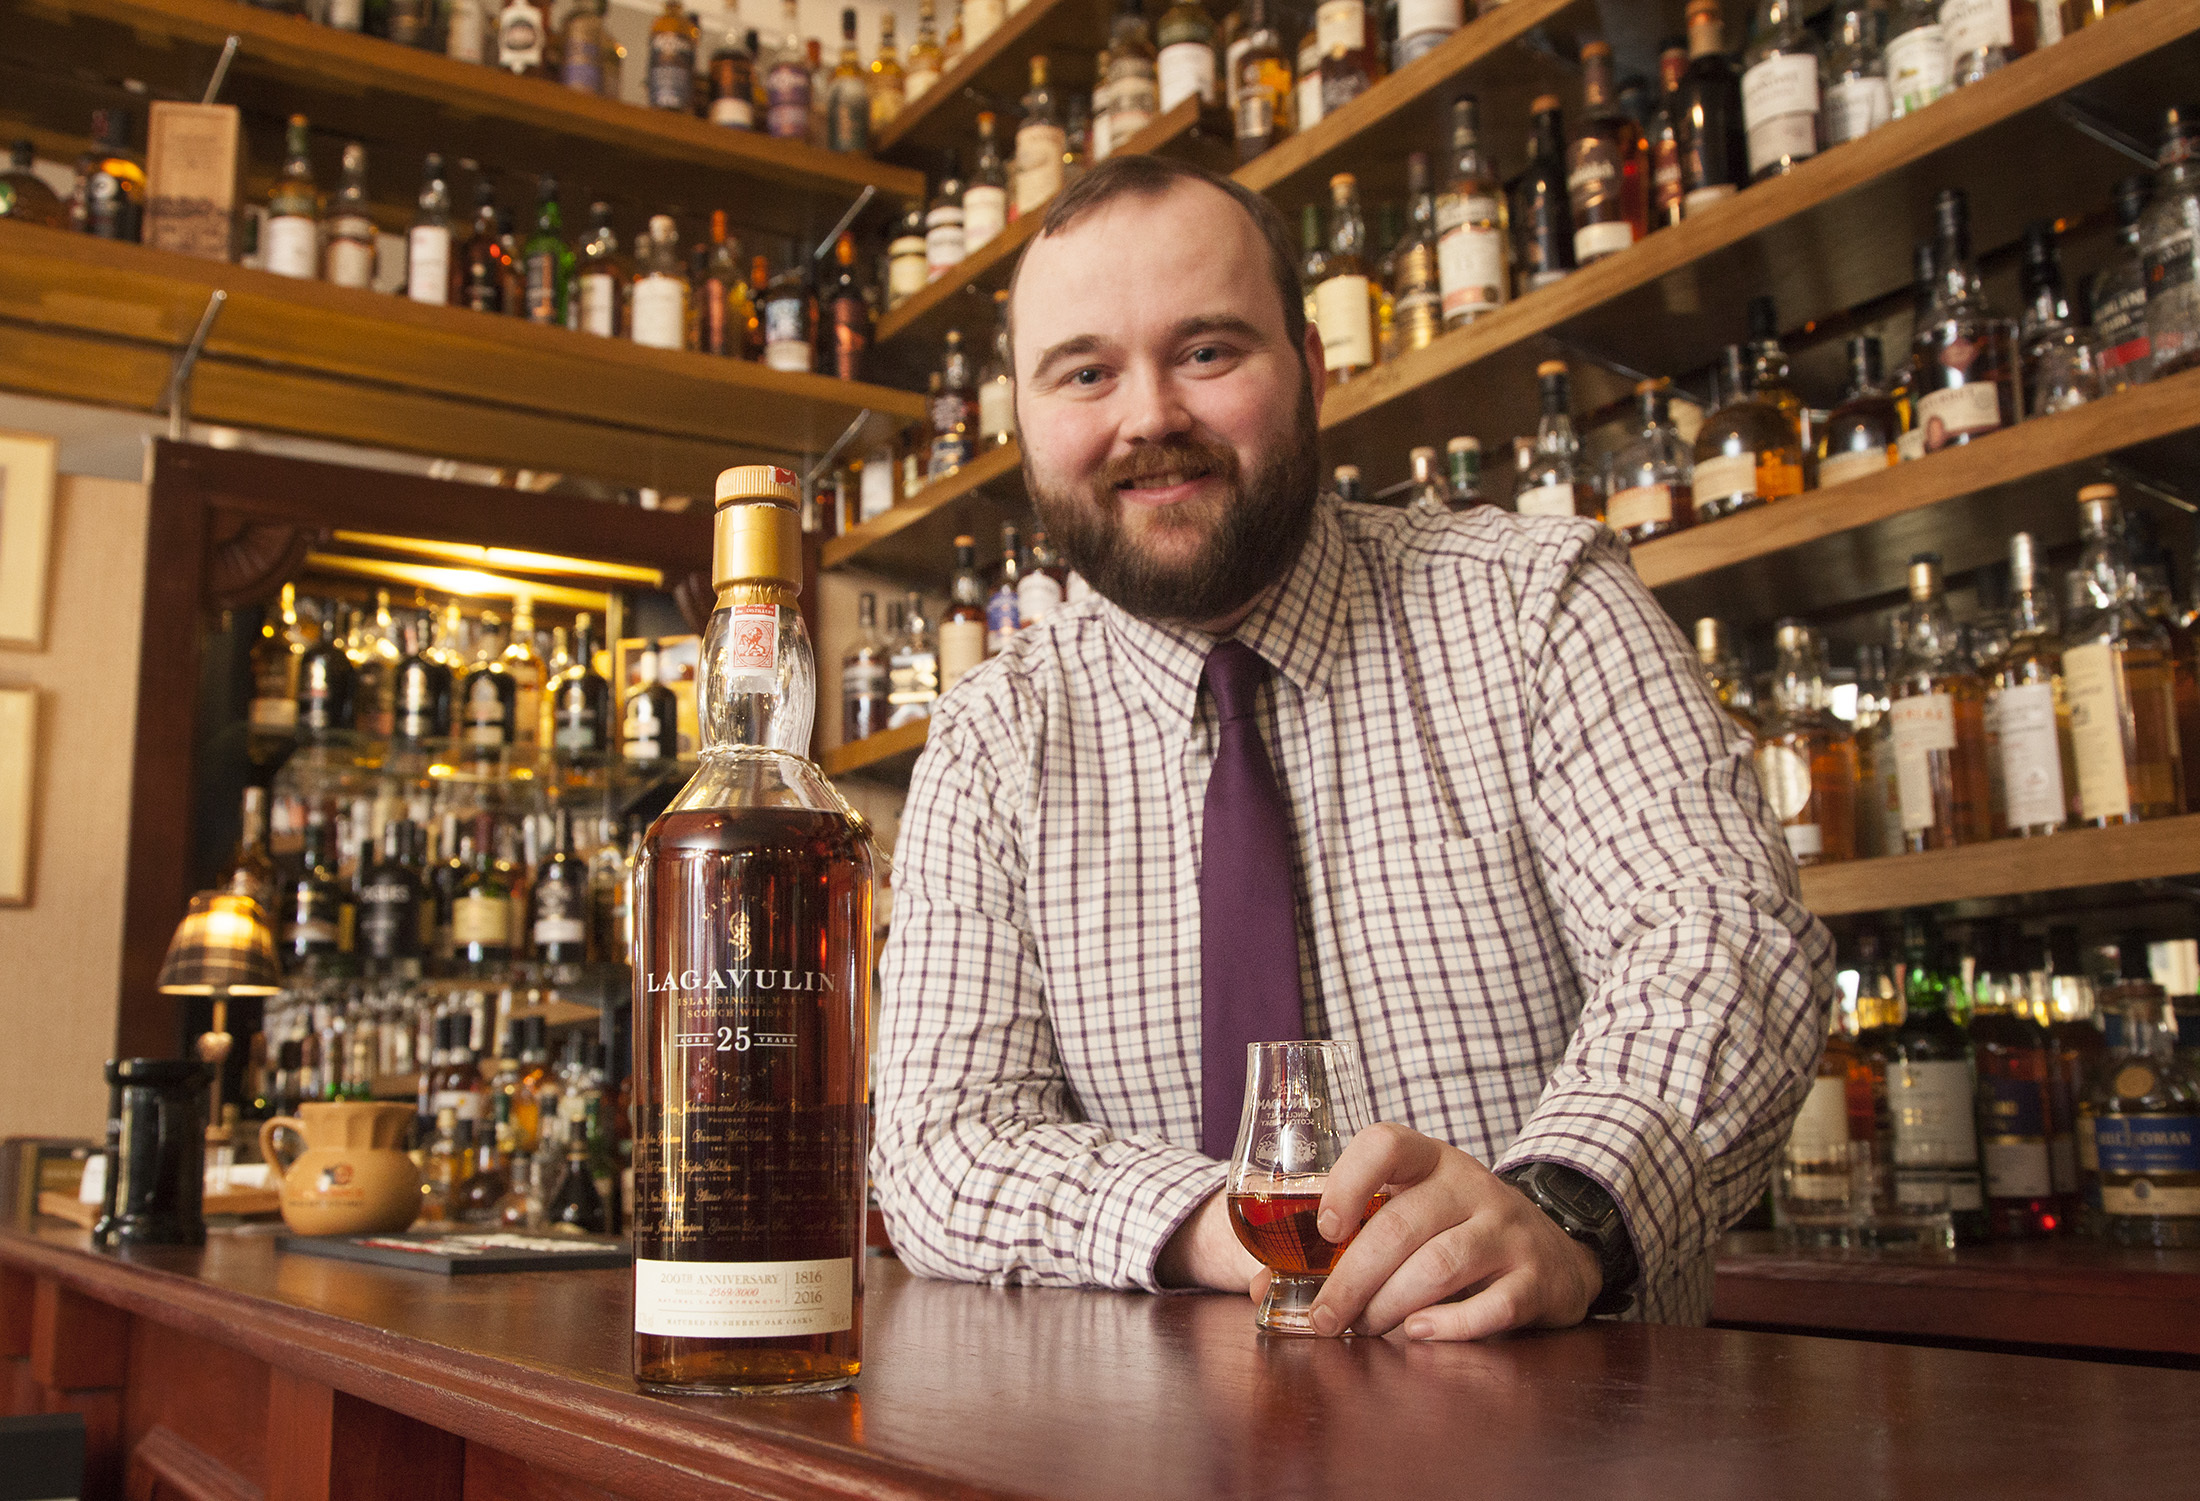 Operations manager Samuel Allen with the rare whisky.